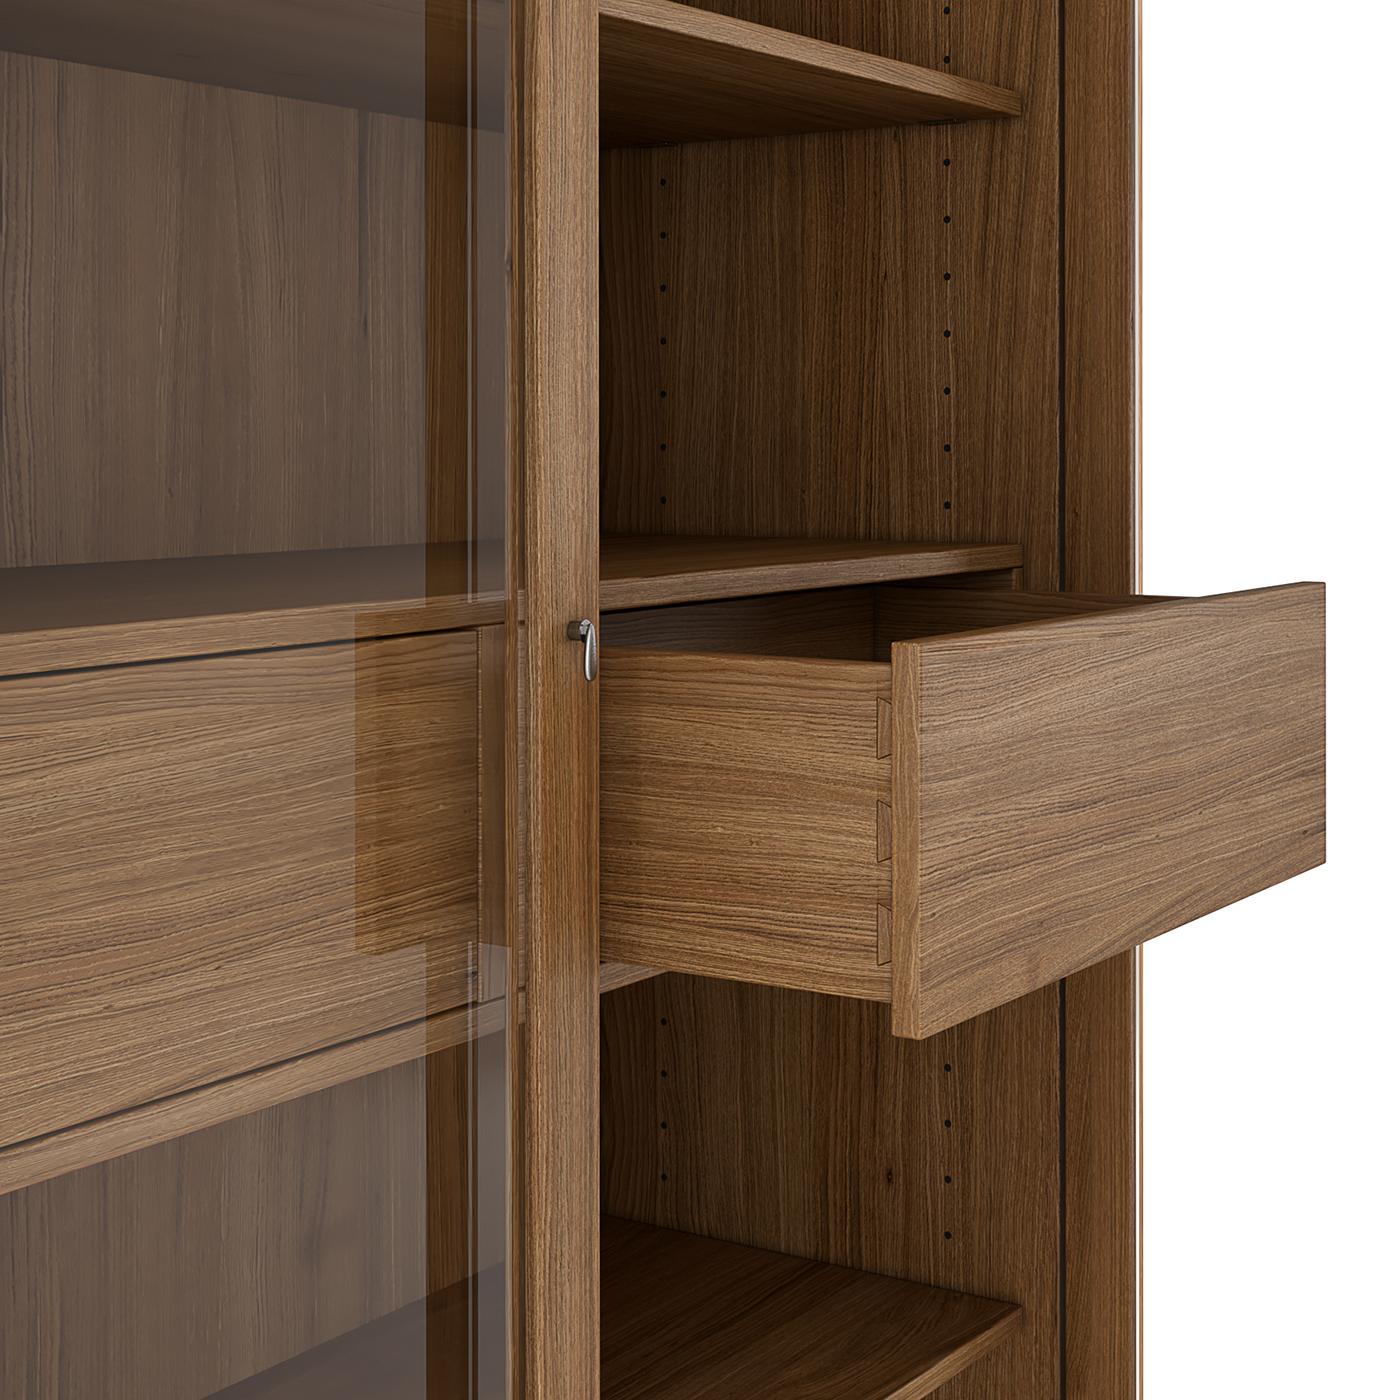 Characterized by simple and clean lines, this modern bookcase will elegantly showcase precious books and collectibles. The frame is masterfully handcrafted of white oak and rests on a plinth base with concealed leveling feet. The asymmetrical,